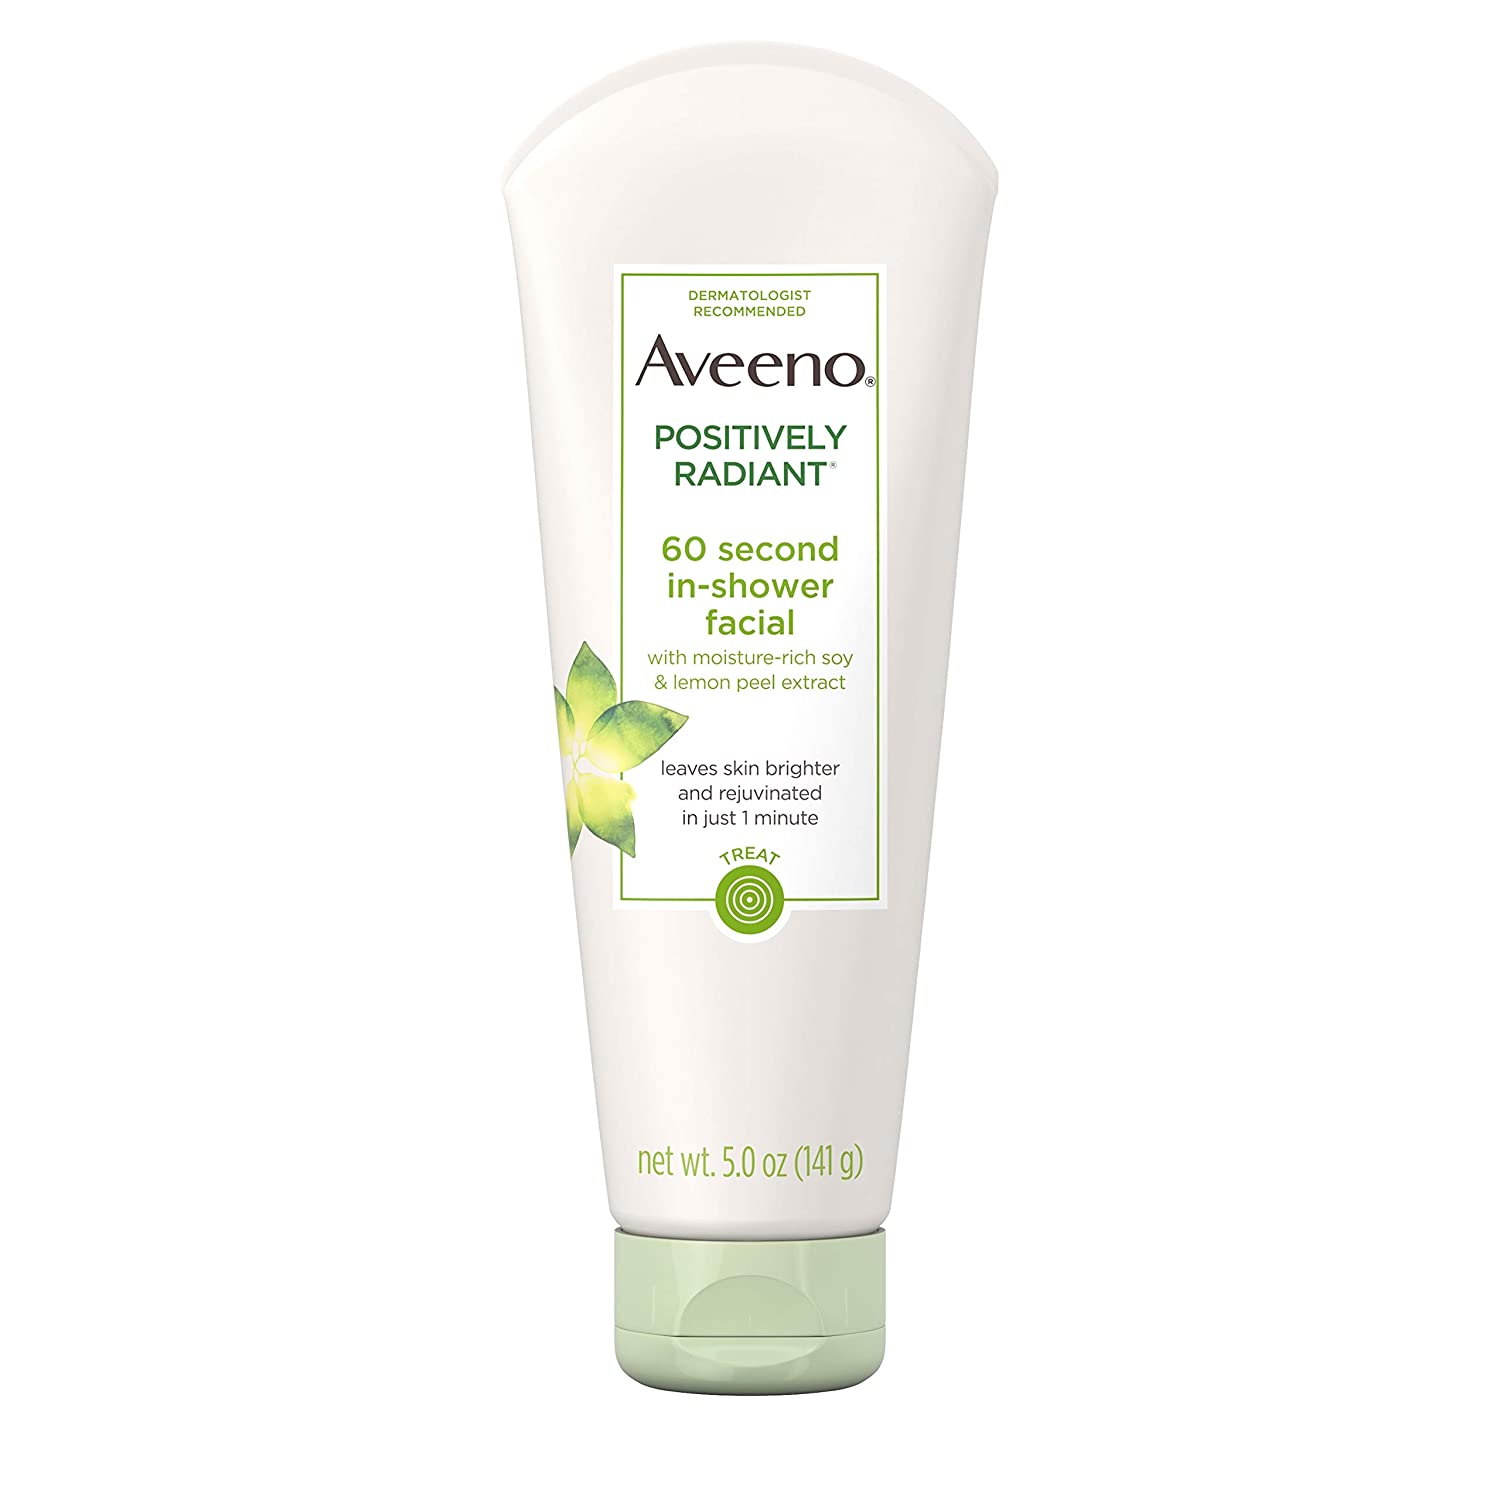 Aveeno Active Naturals Positively Radiant 60 Second In-Shower Facial Cleanser 5 oz (Pack of 4) - image 3 of 7